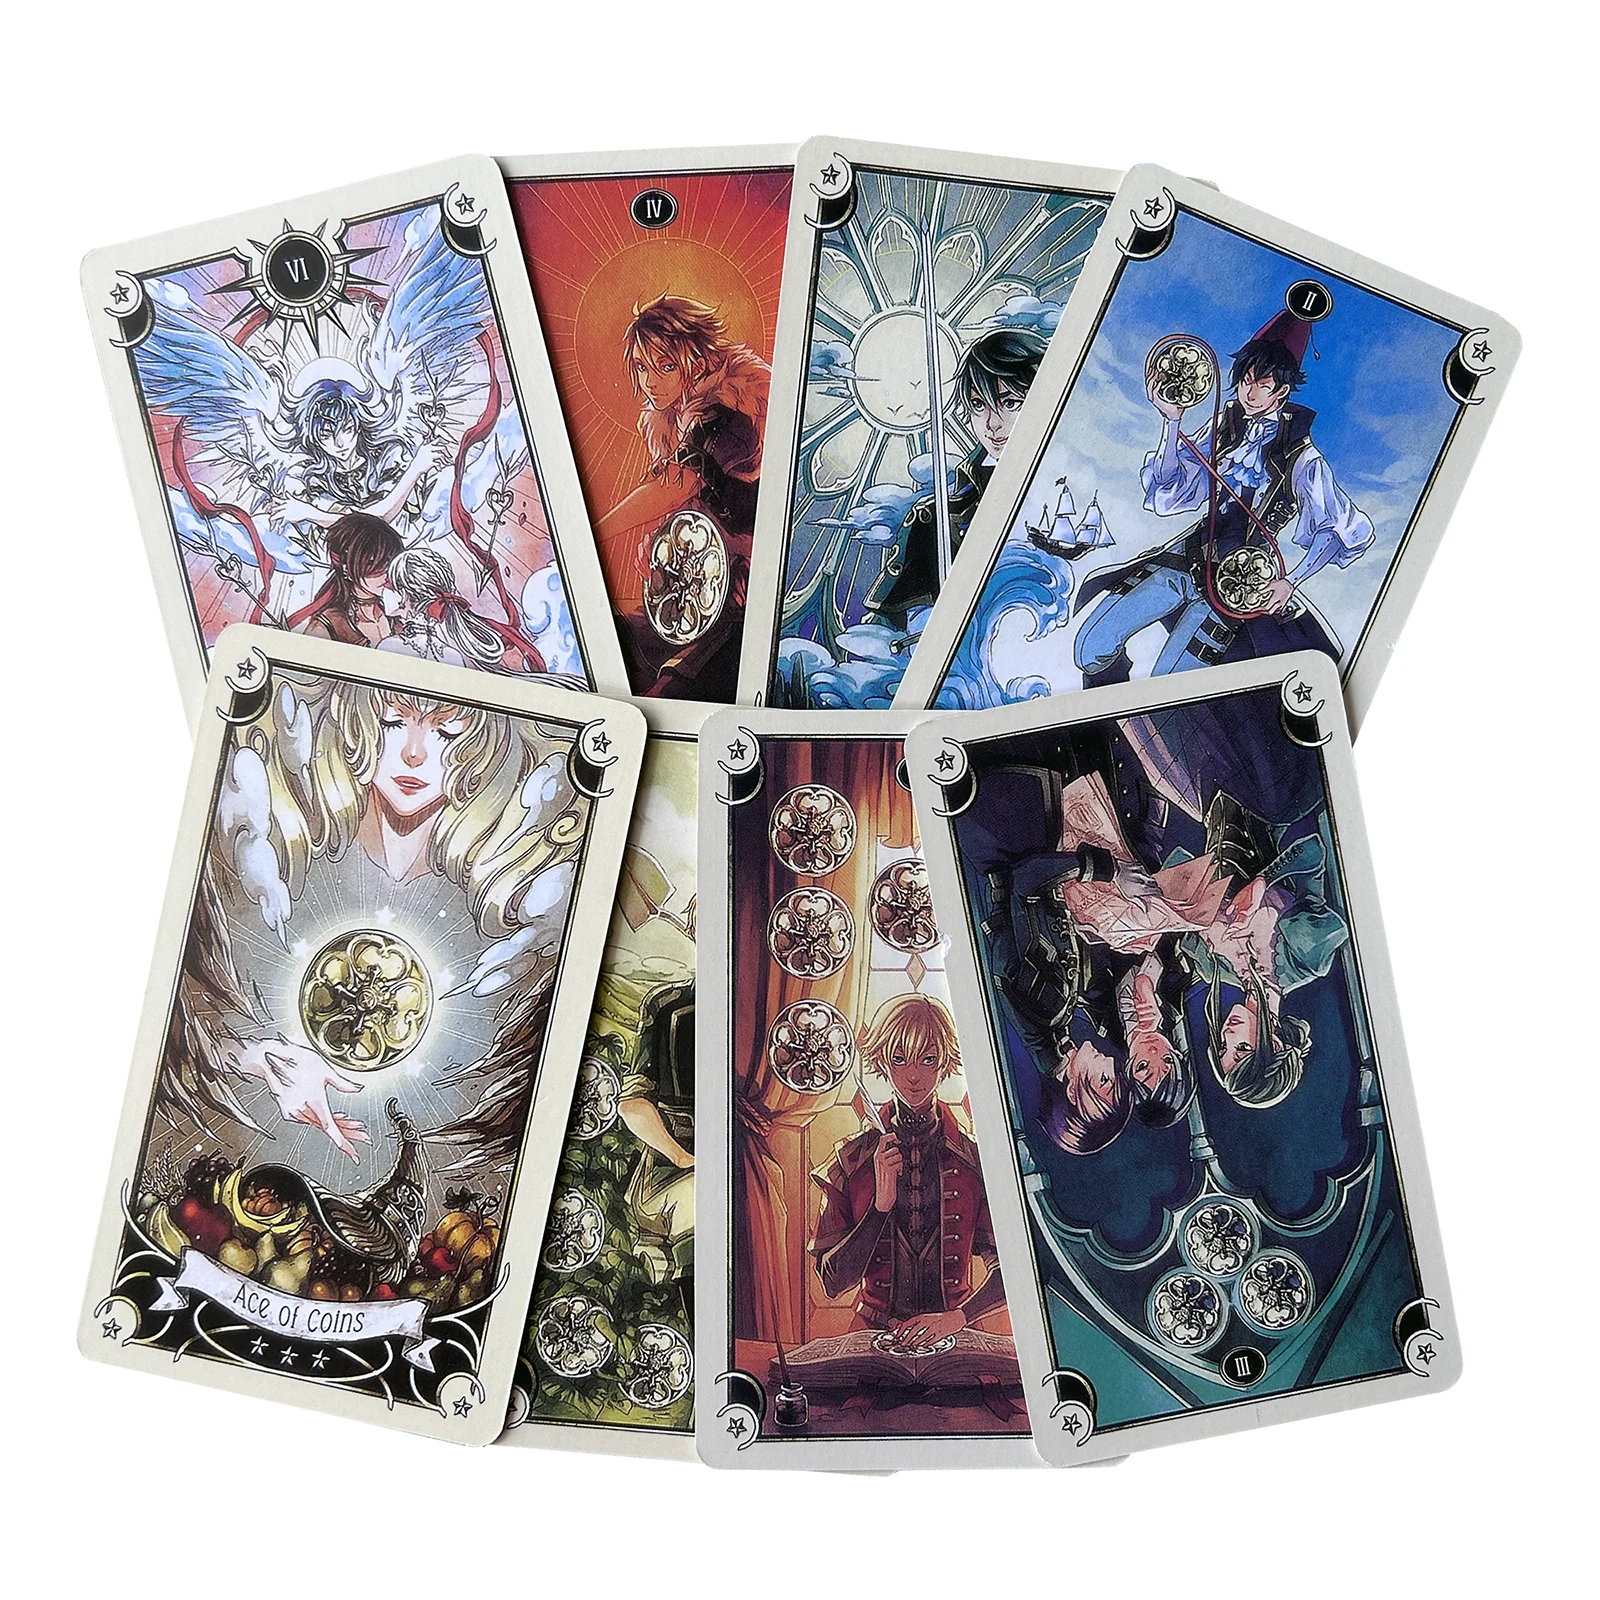 Hot Sell Tarot Cards 12x7 Board Game for Divination Personal Use Tarot Deck Party Games Full English Table Game Outdoor Camping. carry travel luggage handbag tote traveling suitcase fitness item personal organizer luggages use daily outdoor large capacity